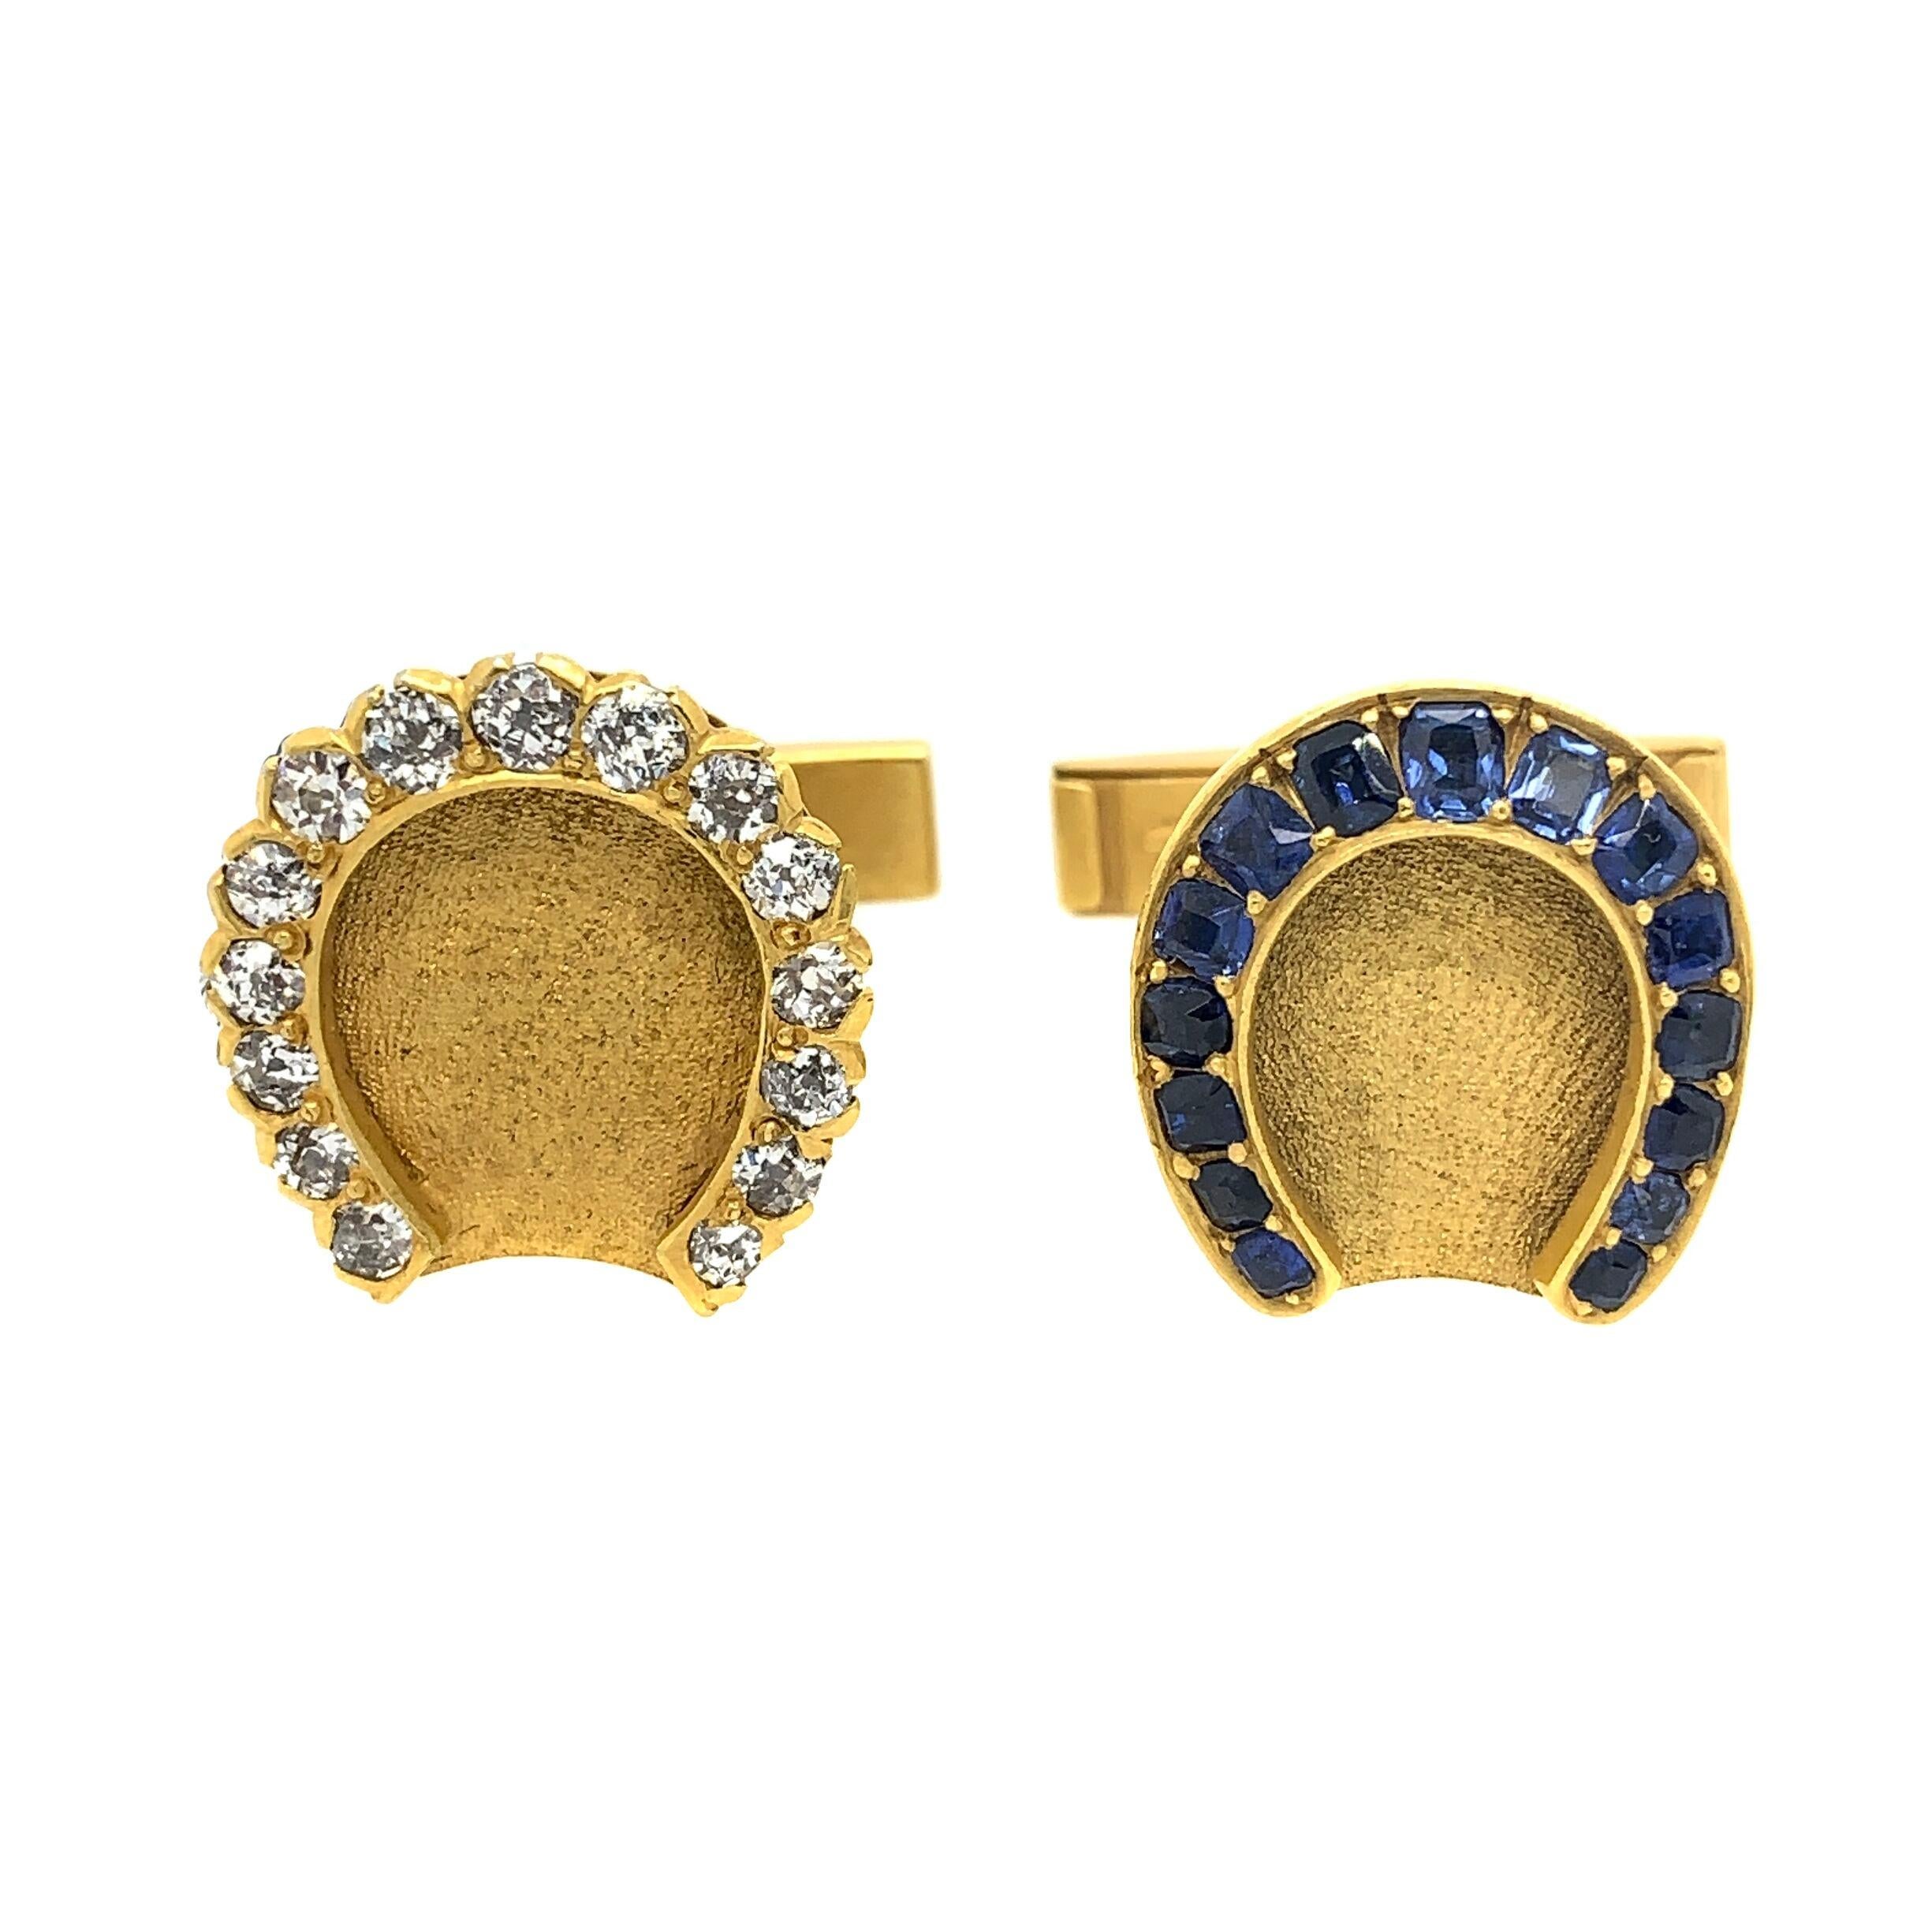 14 Karat Yellow Gold Antique Horse Shoe Cufflinks In Excellent Condition For Sale In New York, NY